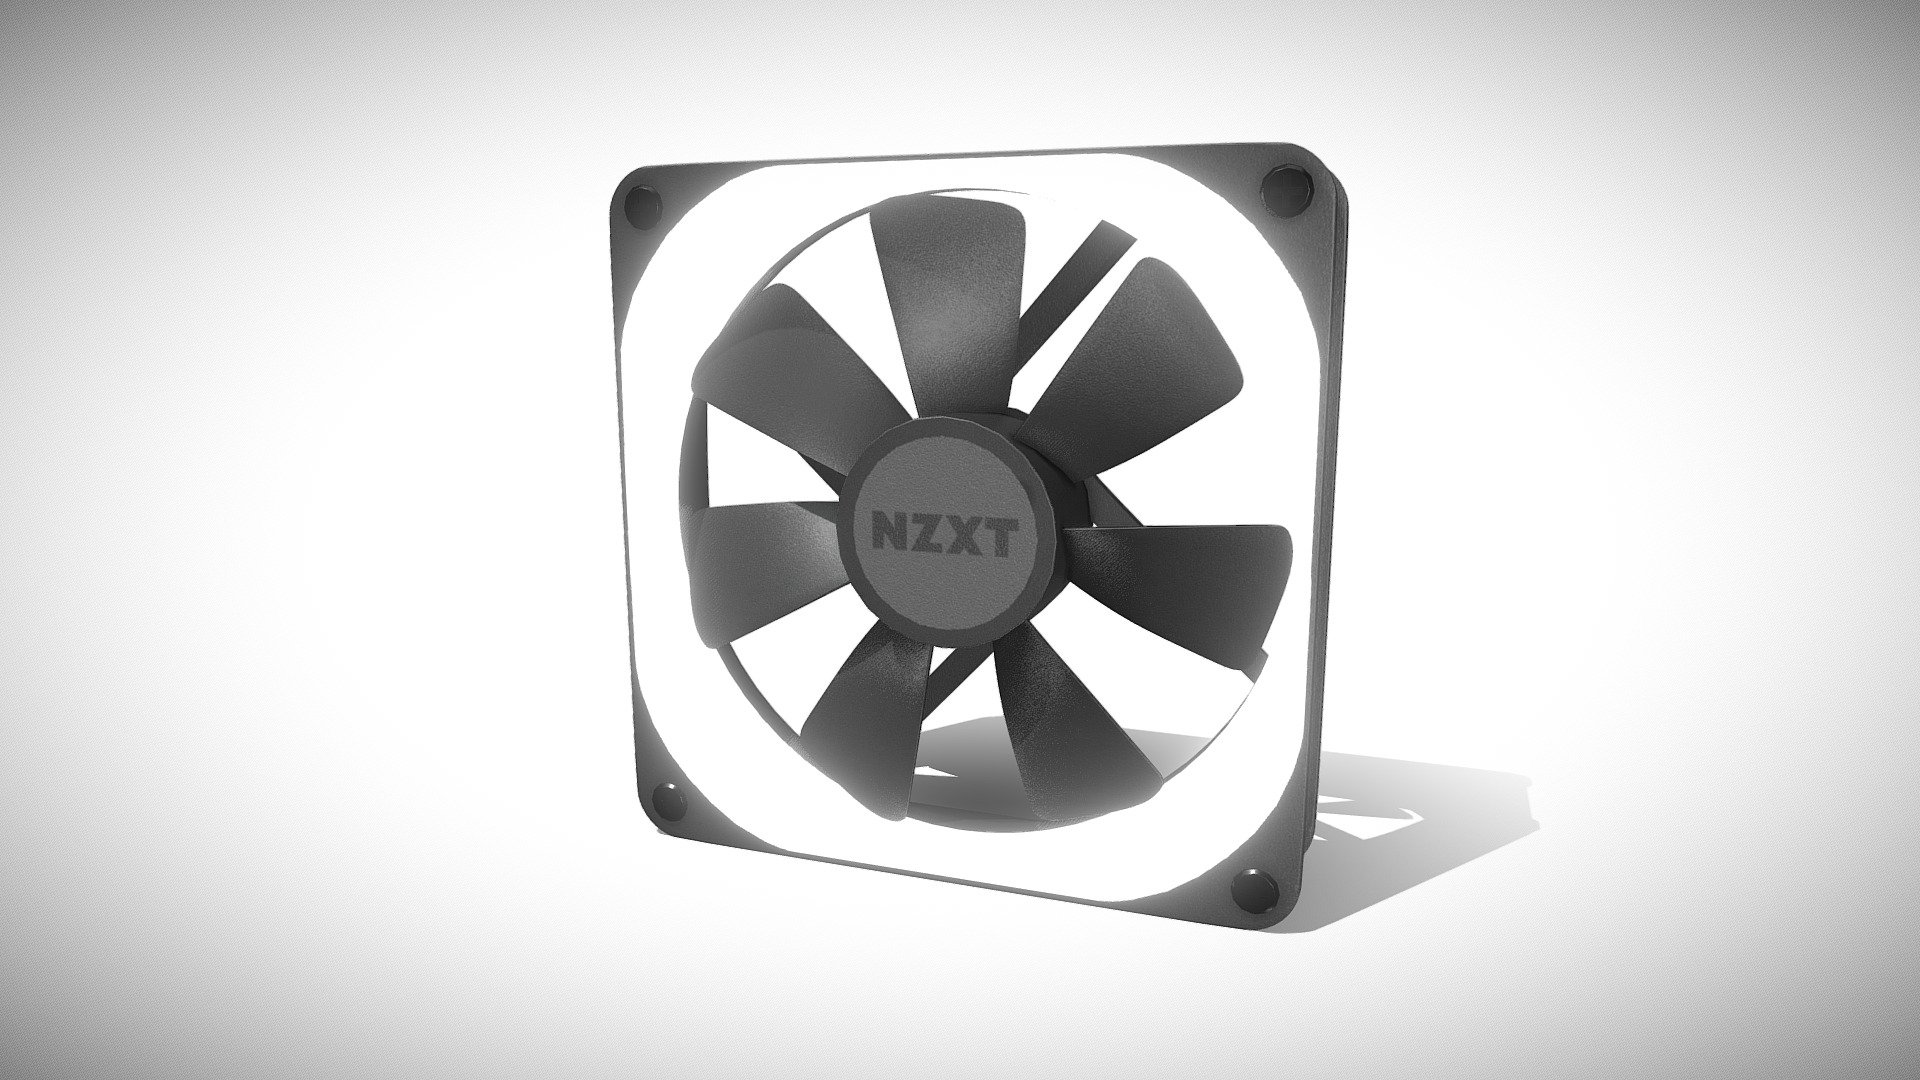 3D Model of an NZXT Aer P120 120mm Case fan made in maya and textured in Substance Painter.
Took about 3hrs to complete 3d model